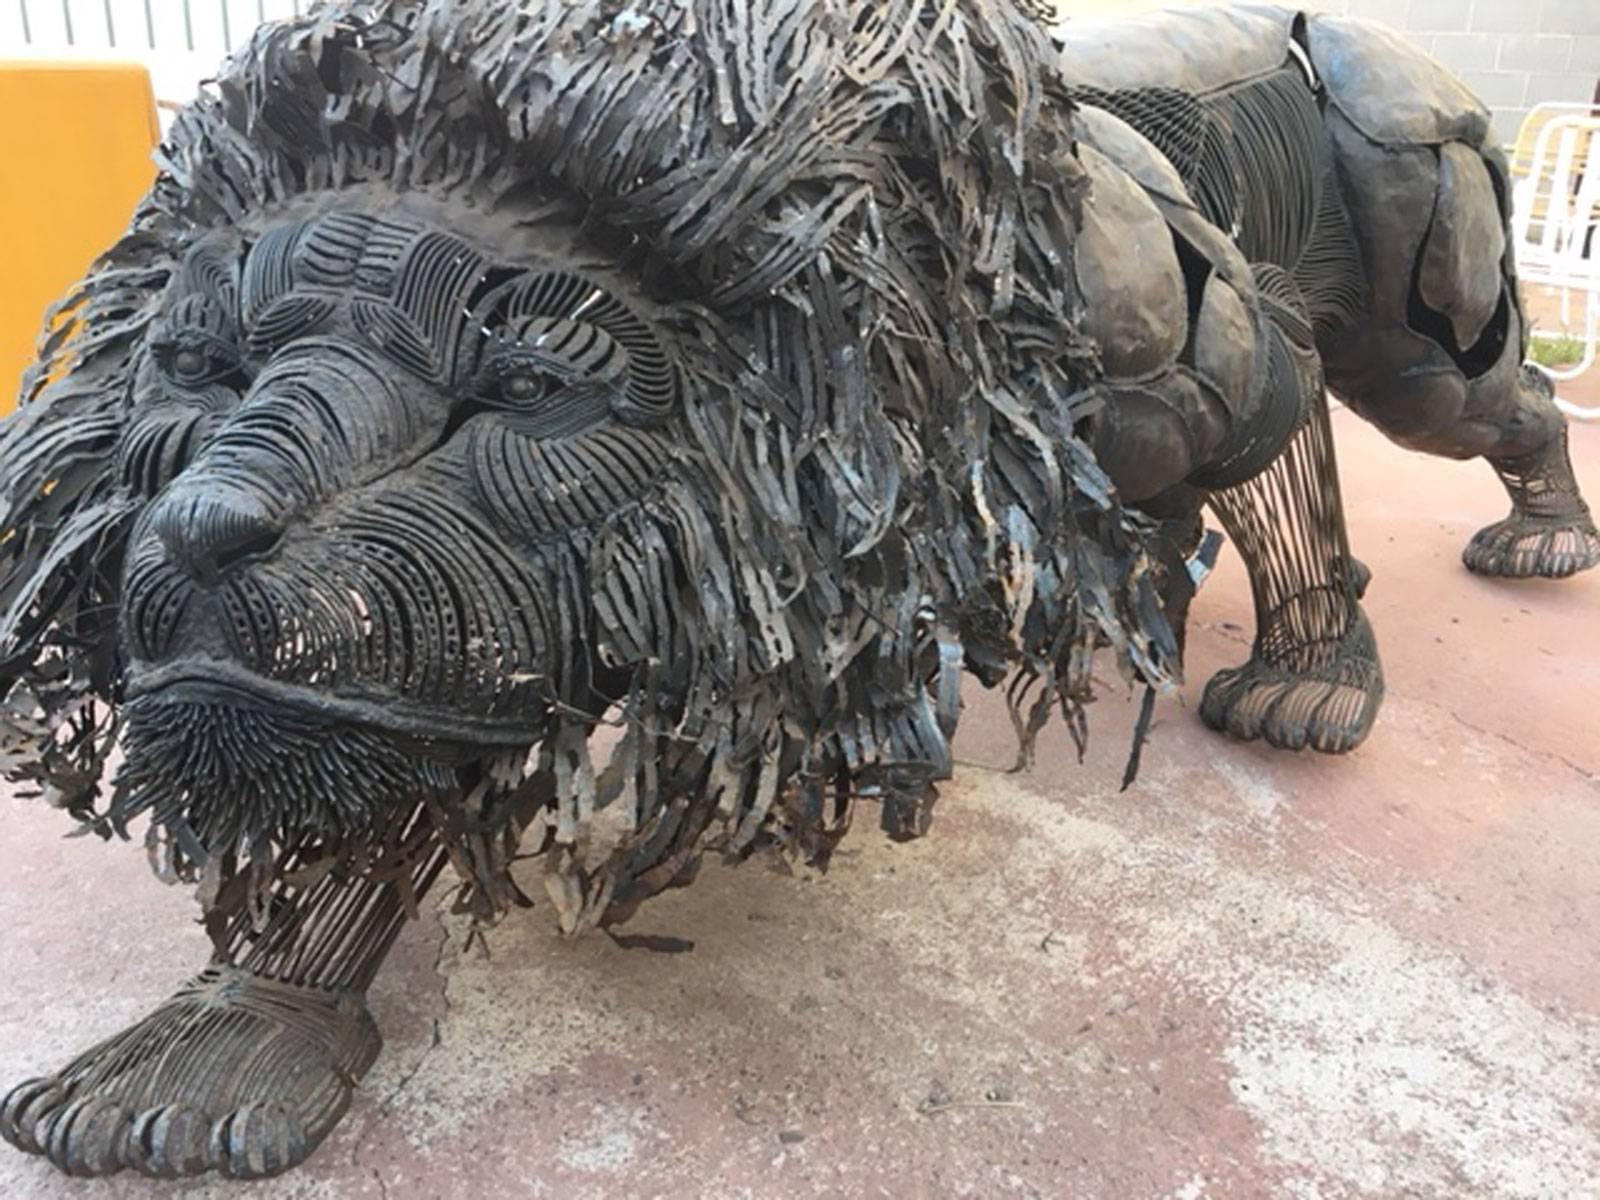 Welded Lifesize Lion Metal Sculpture by Dale Edwards